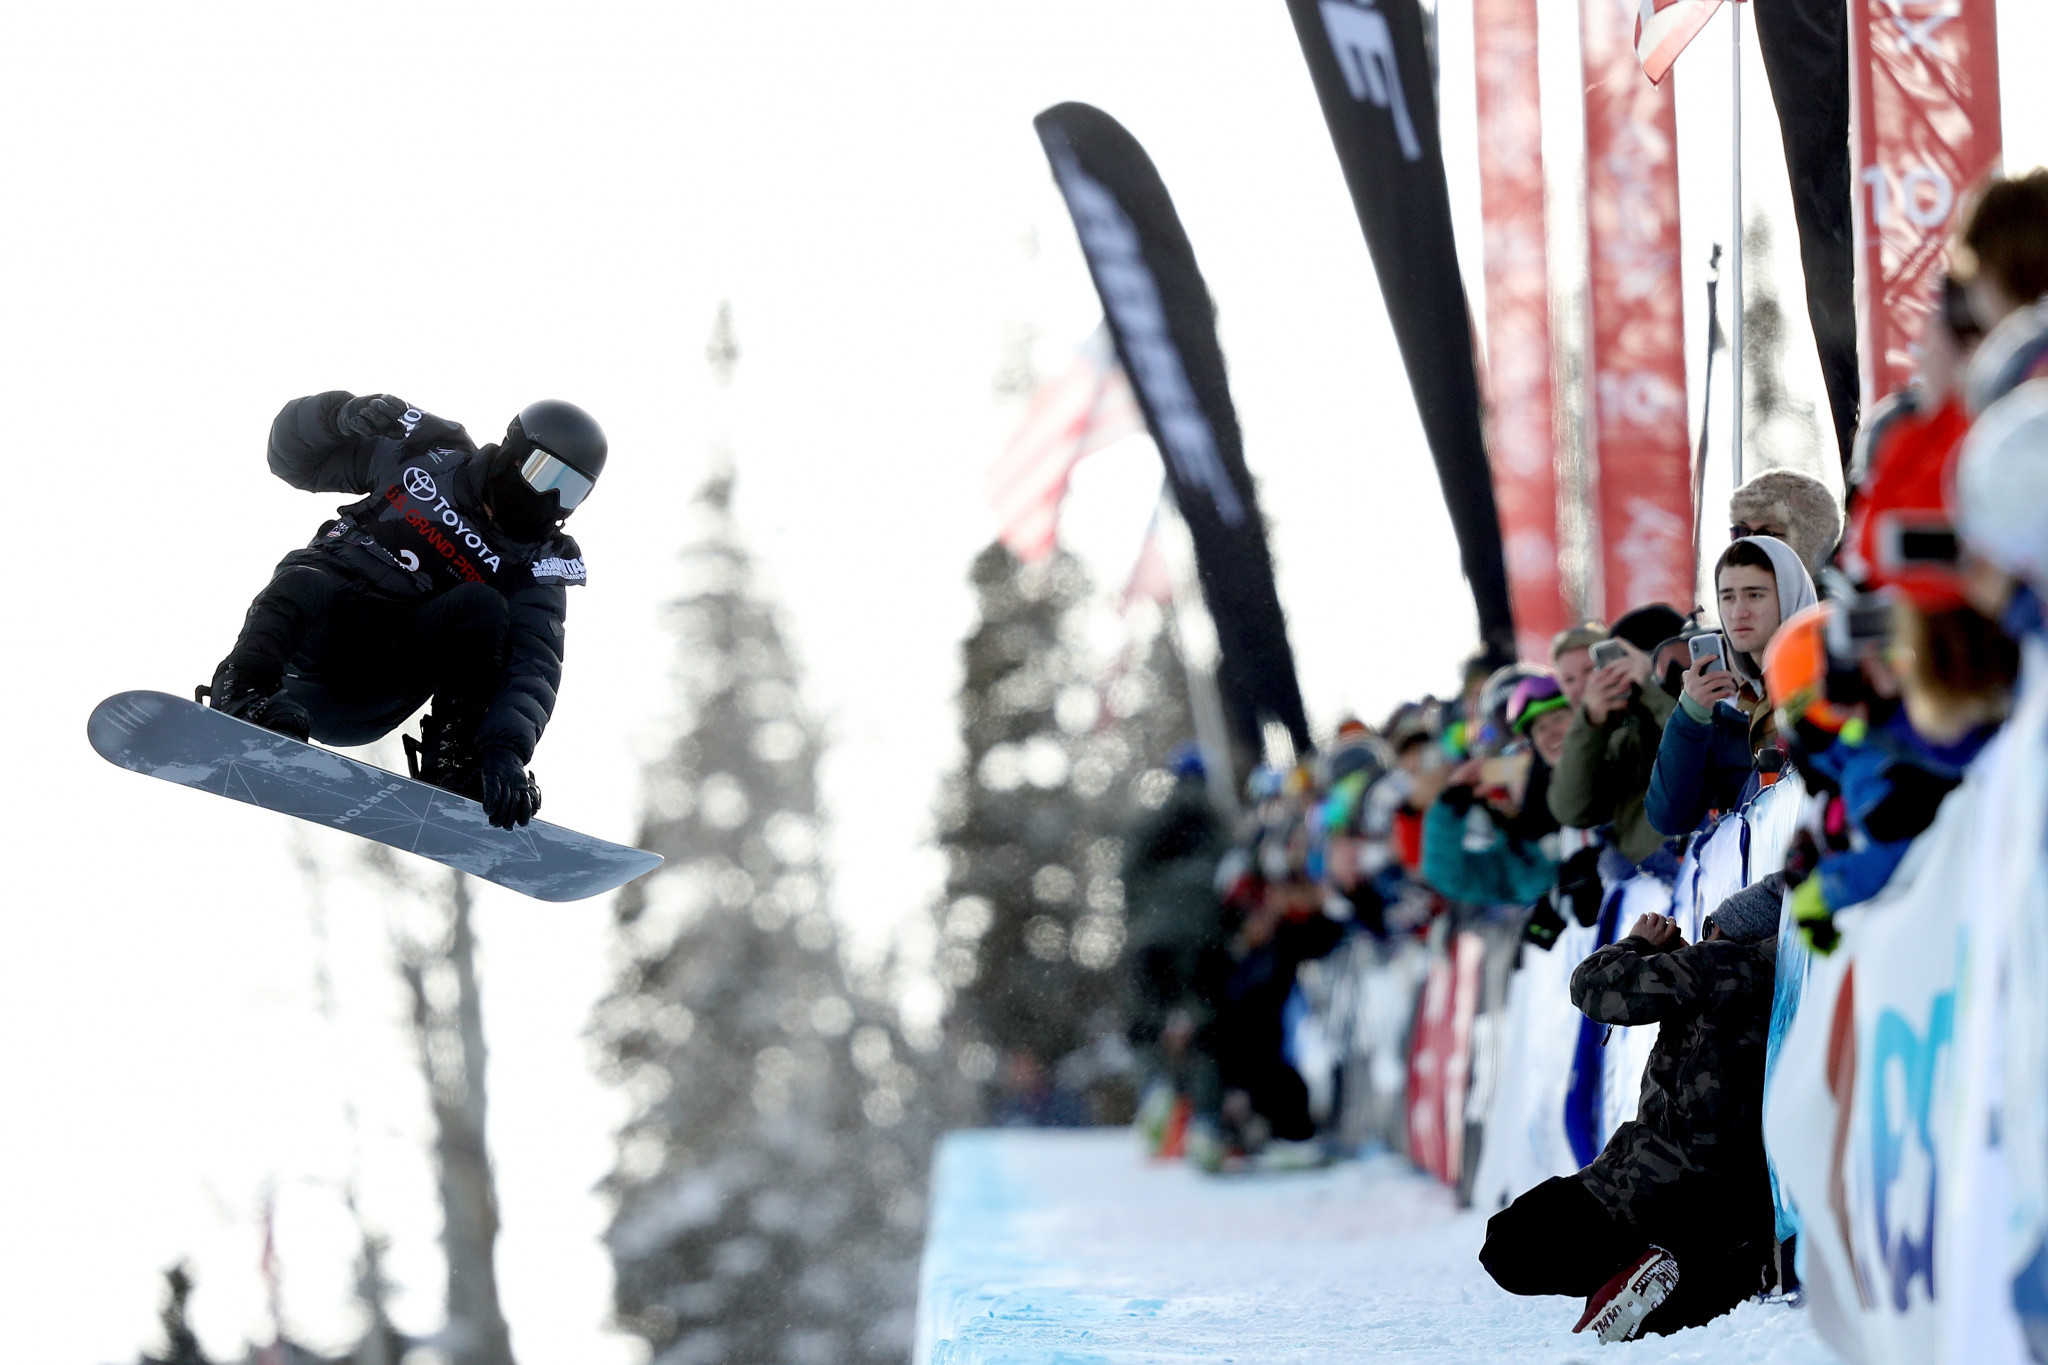 White posts perfect score to triumph at FIS Snowboard World Cup and secure Pyeongchang 2018 berth